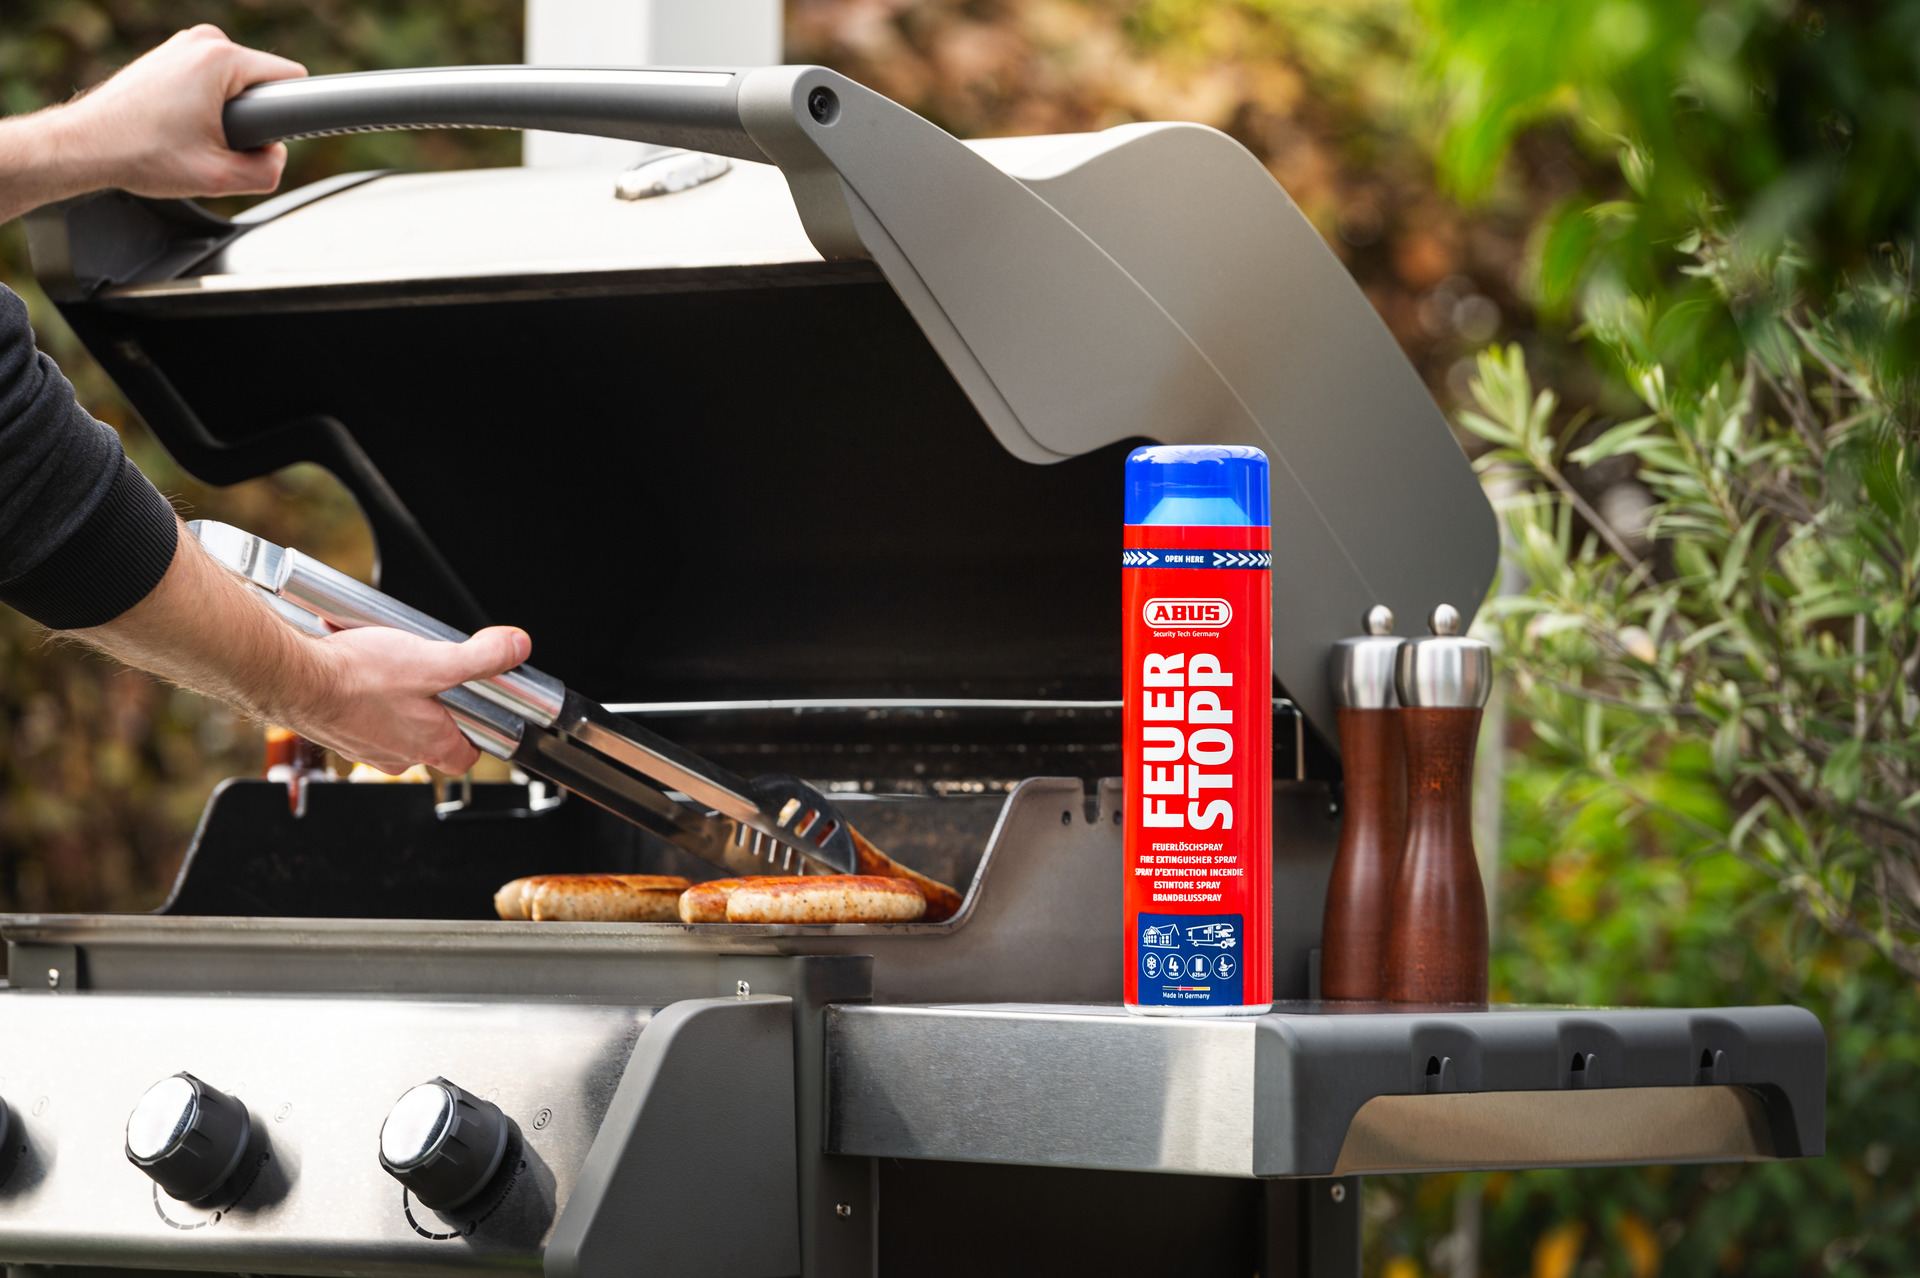 Application example – Fire Extinguisher Spray at the barbecue